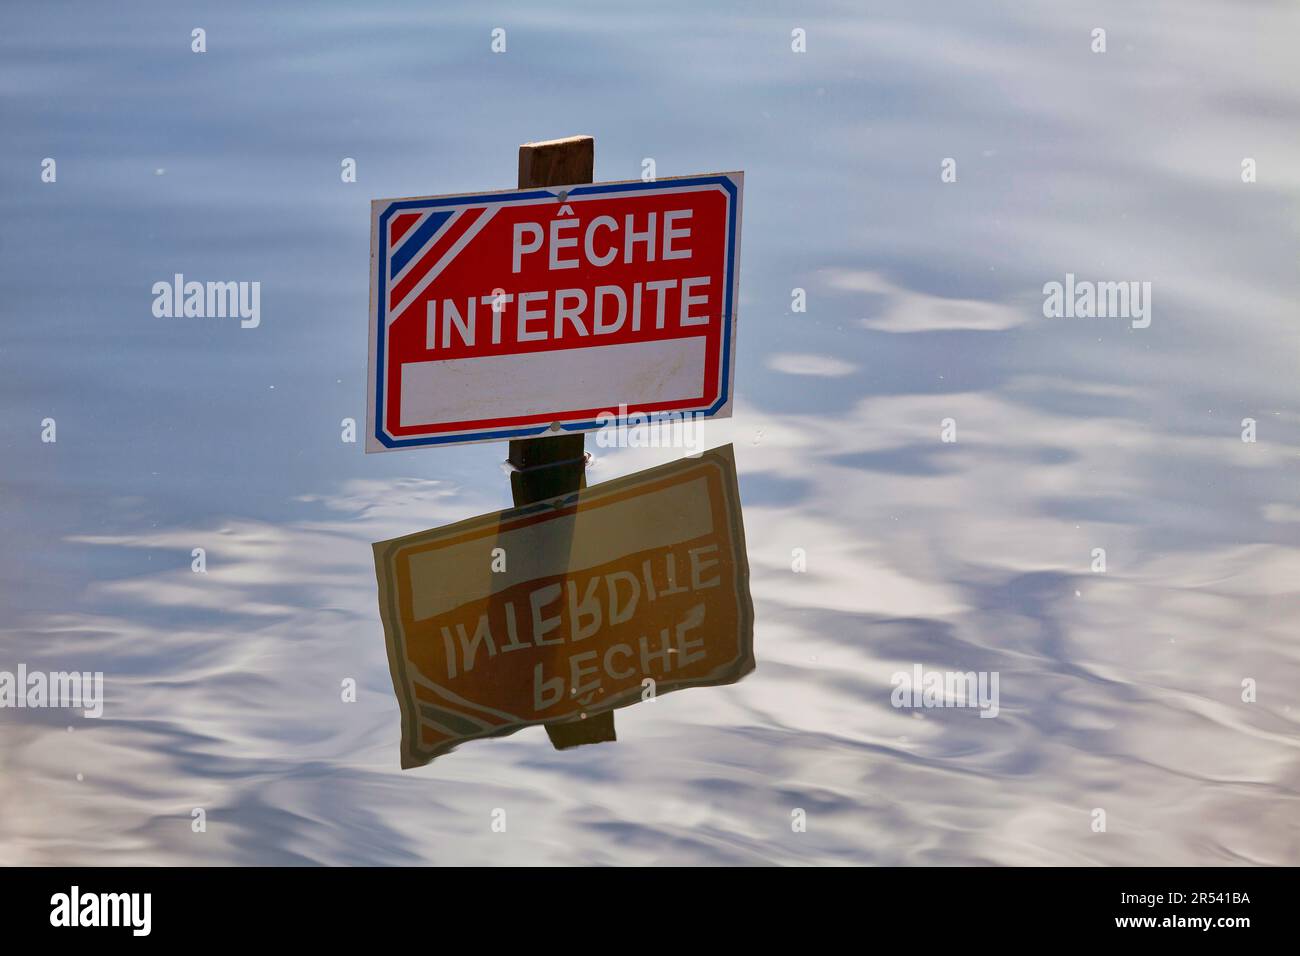 Sign popping out from the water saying in French 'Pêche interdite' meaning in English 'Fishing prohibited'. Stock Photo